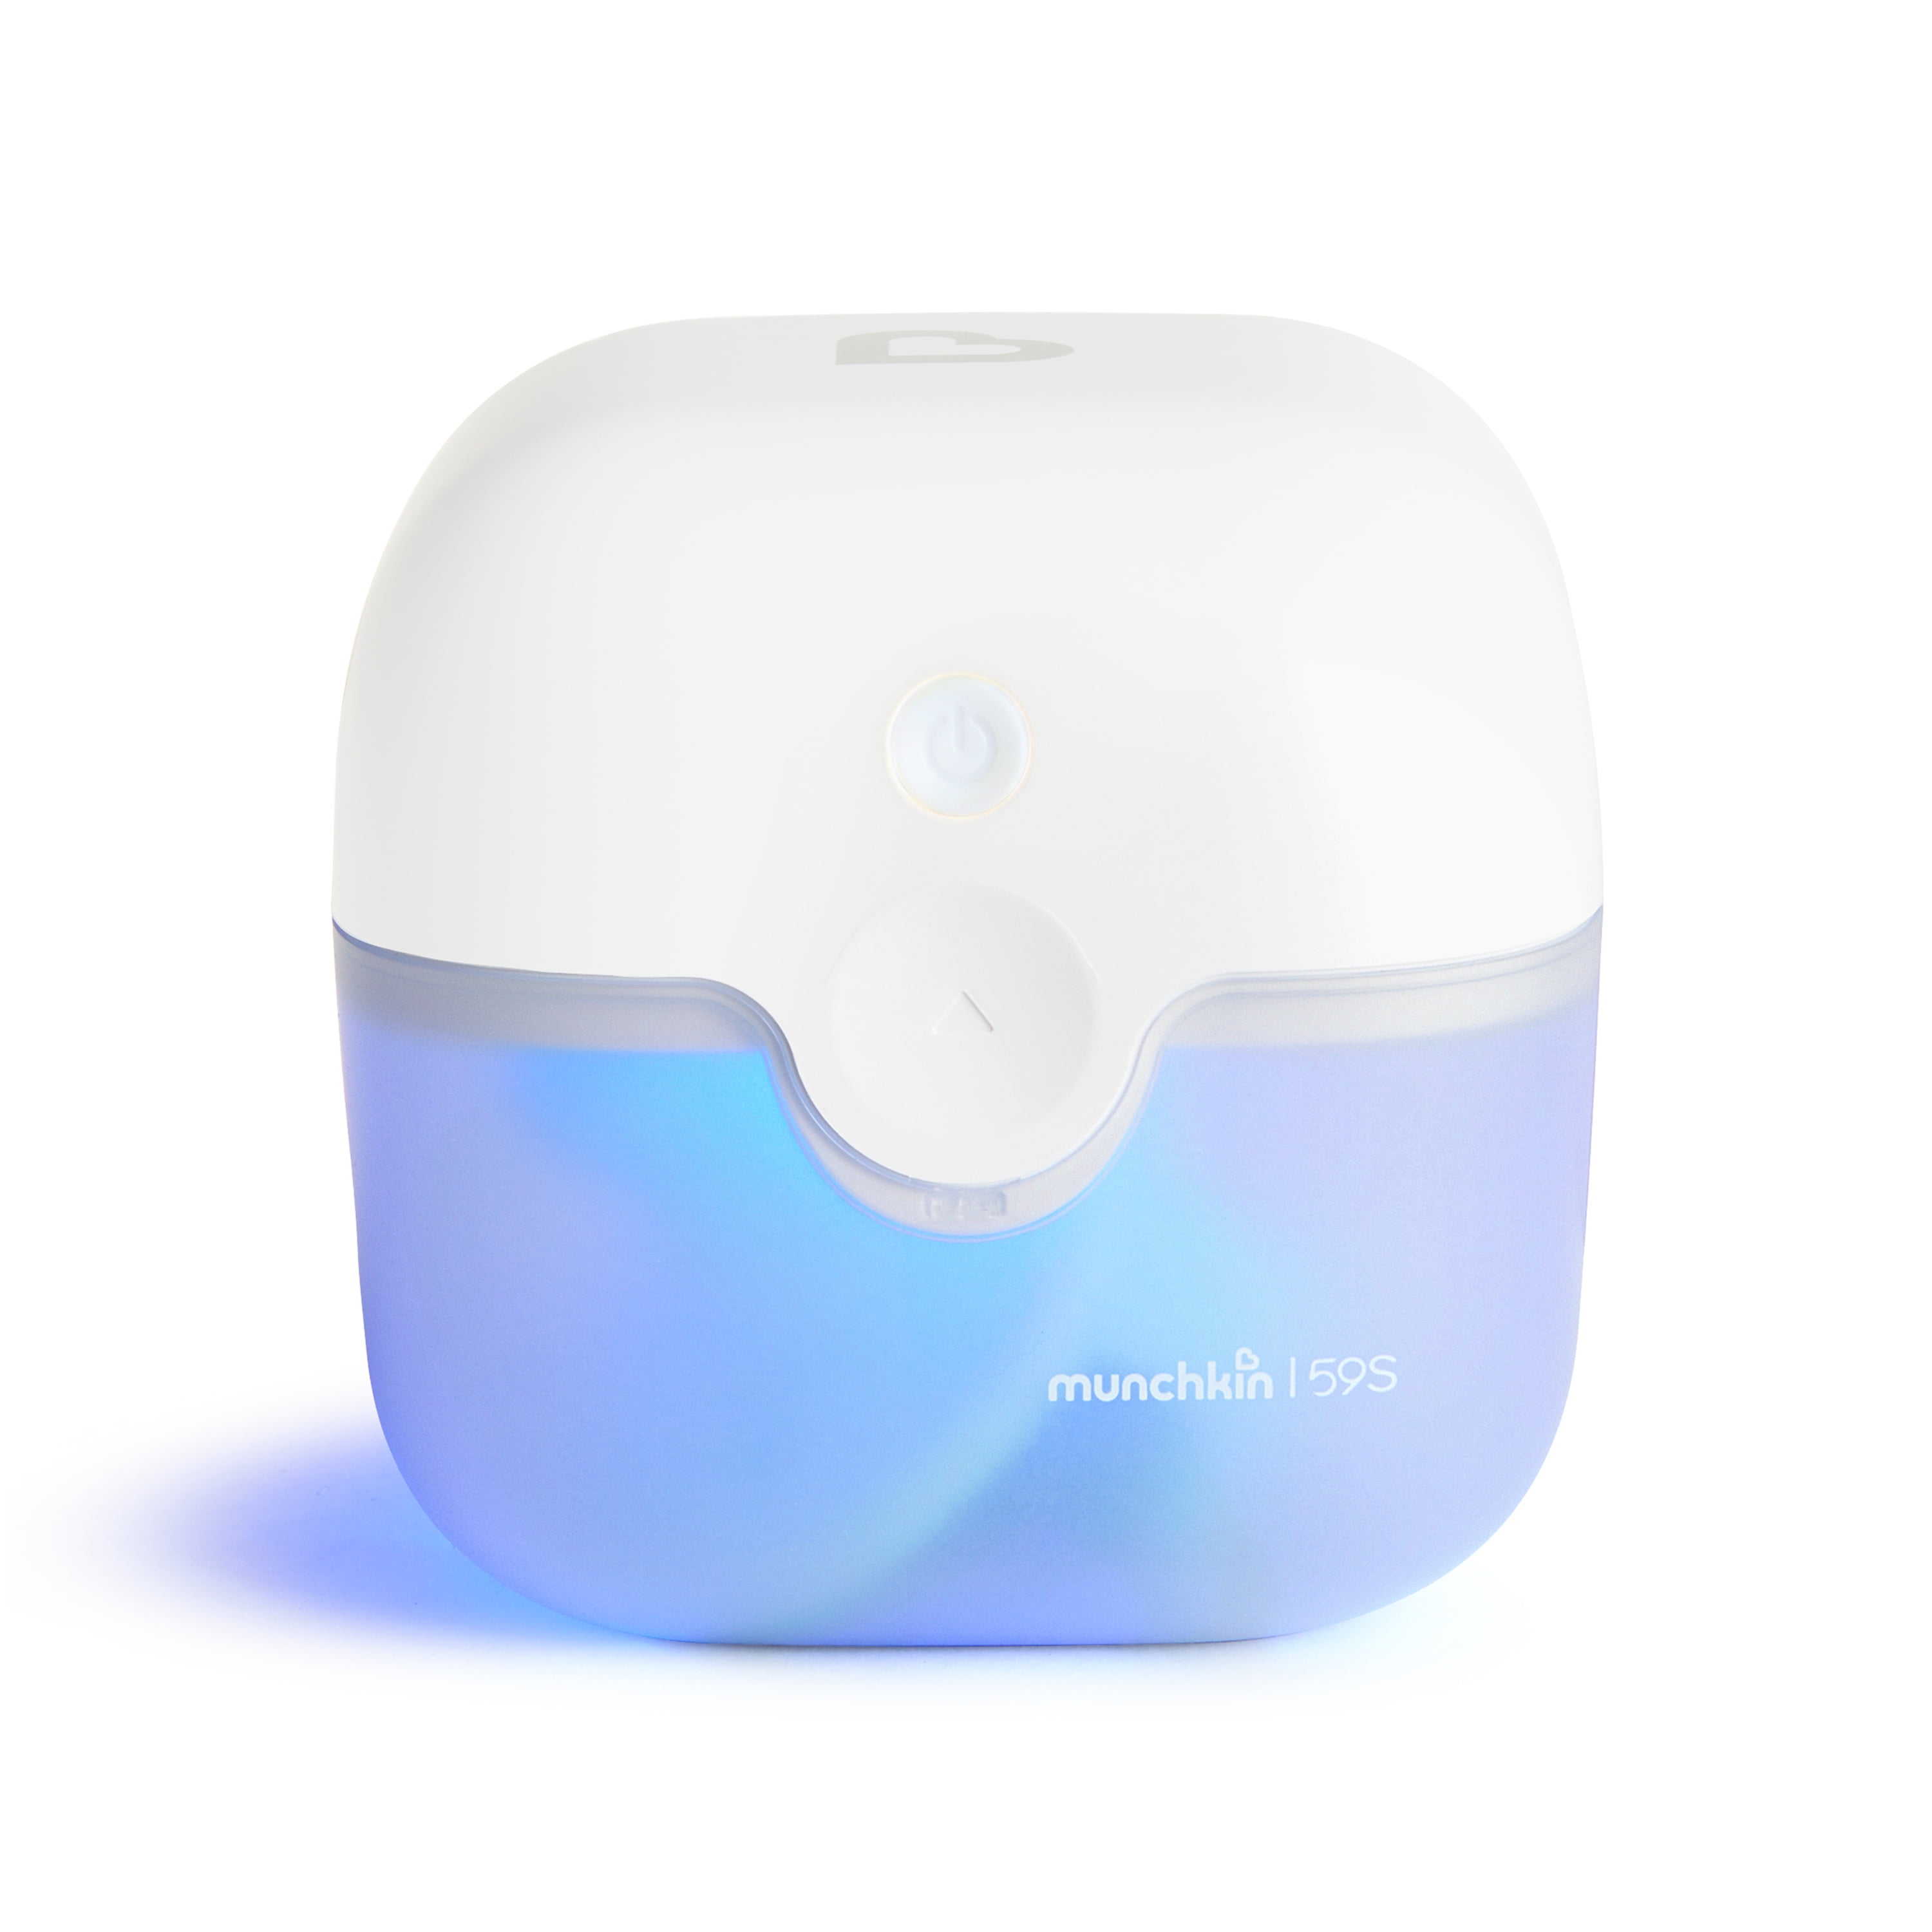 Munchkin Portable UV Sterilizer 99.99% of Germs 59 Seconds, Mini UV Light Sanitizer Box with Rechargeable Battery - Walmart.com